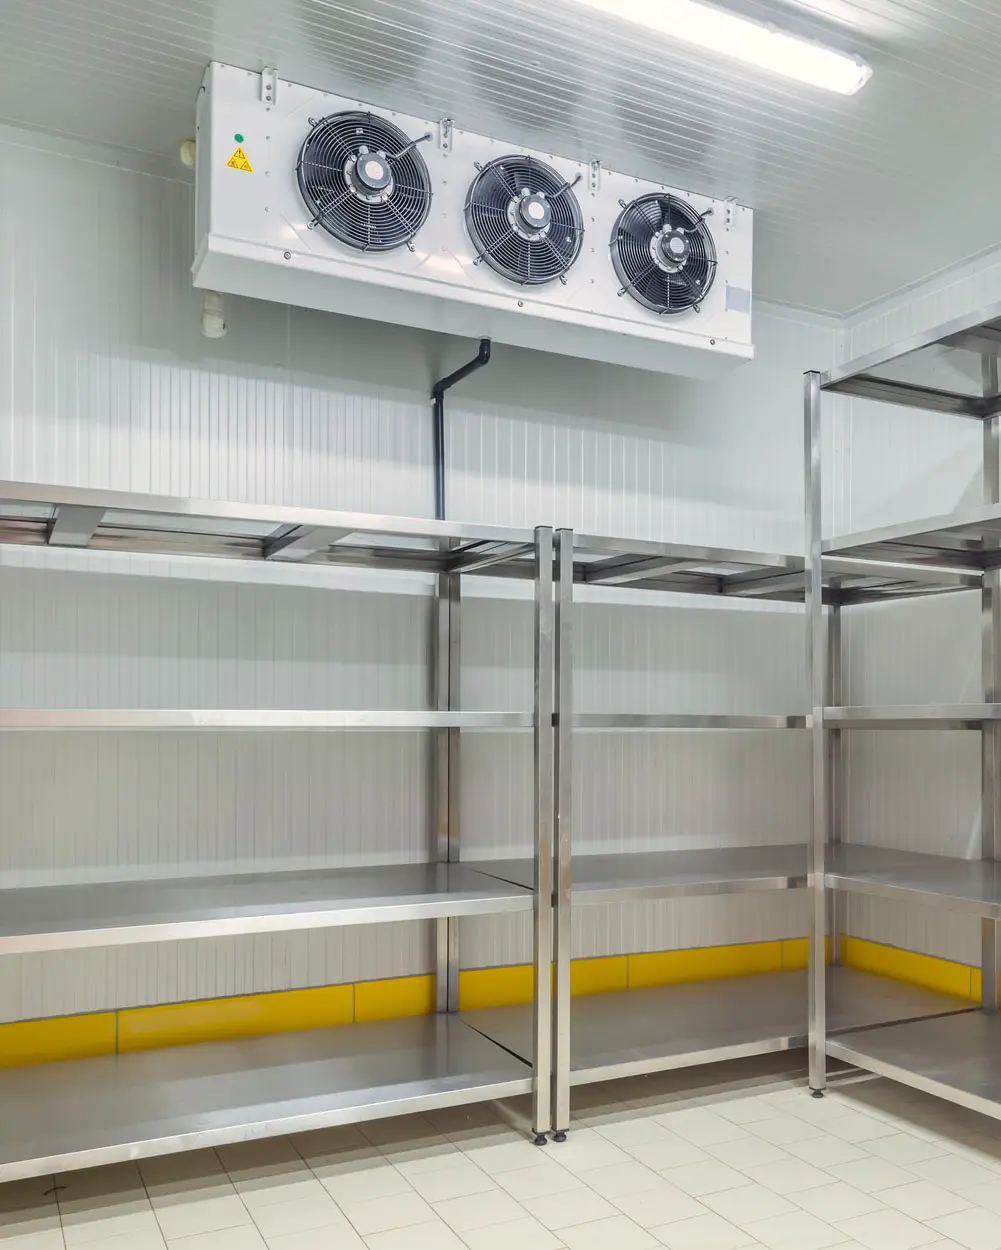 a warehouse refrigeration system designed to maintain optimal temperatures for preserving goods in large-scale storage facilities